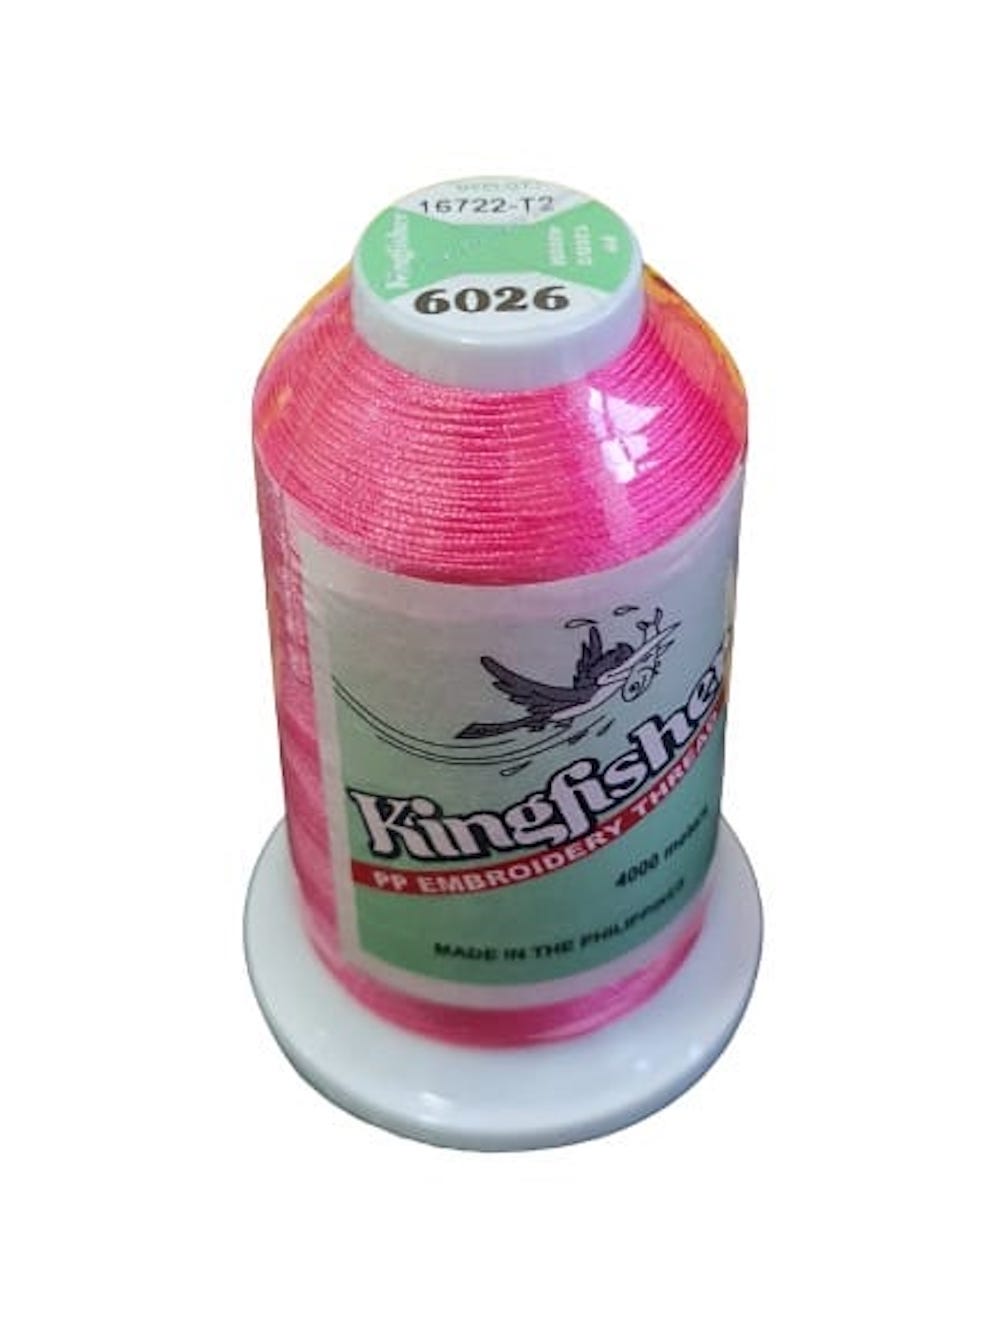 King Fisher Embroidery Thread 4000m 6026 - MY SEWING MALL